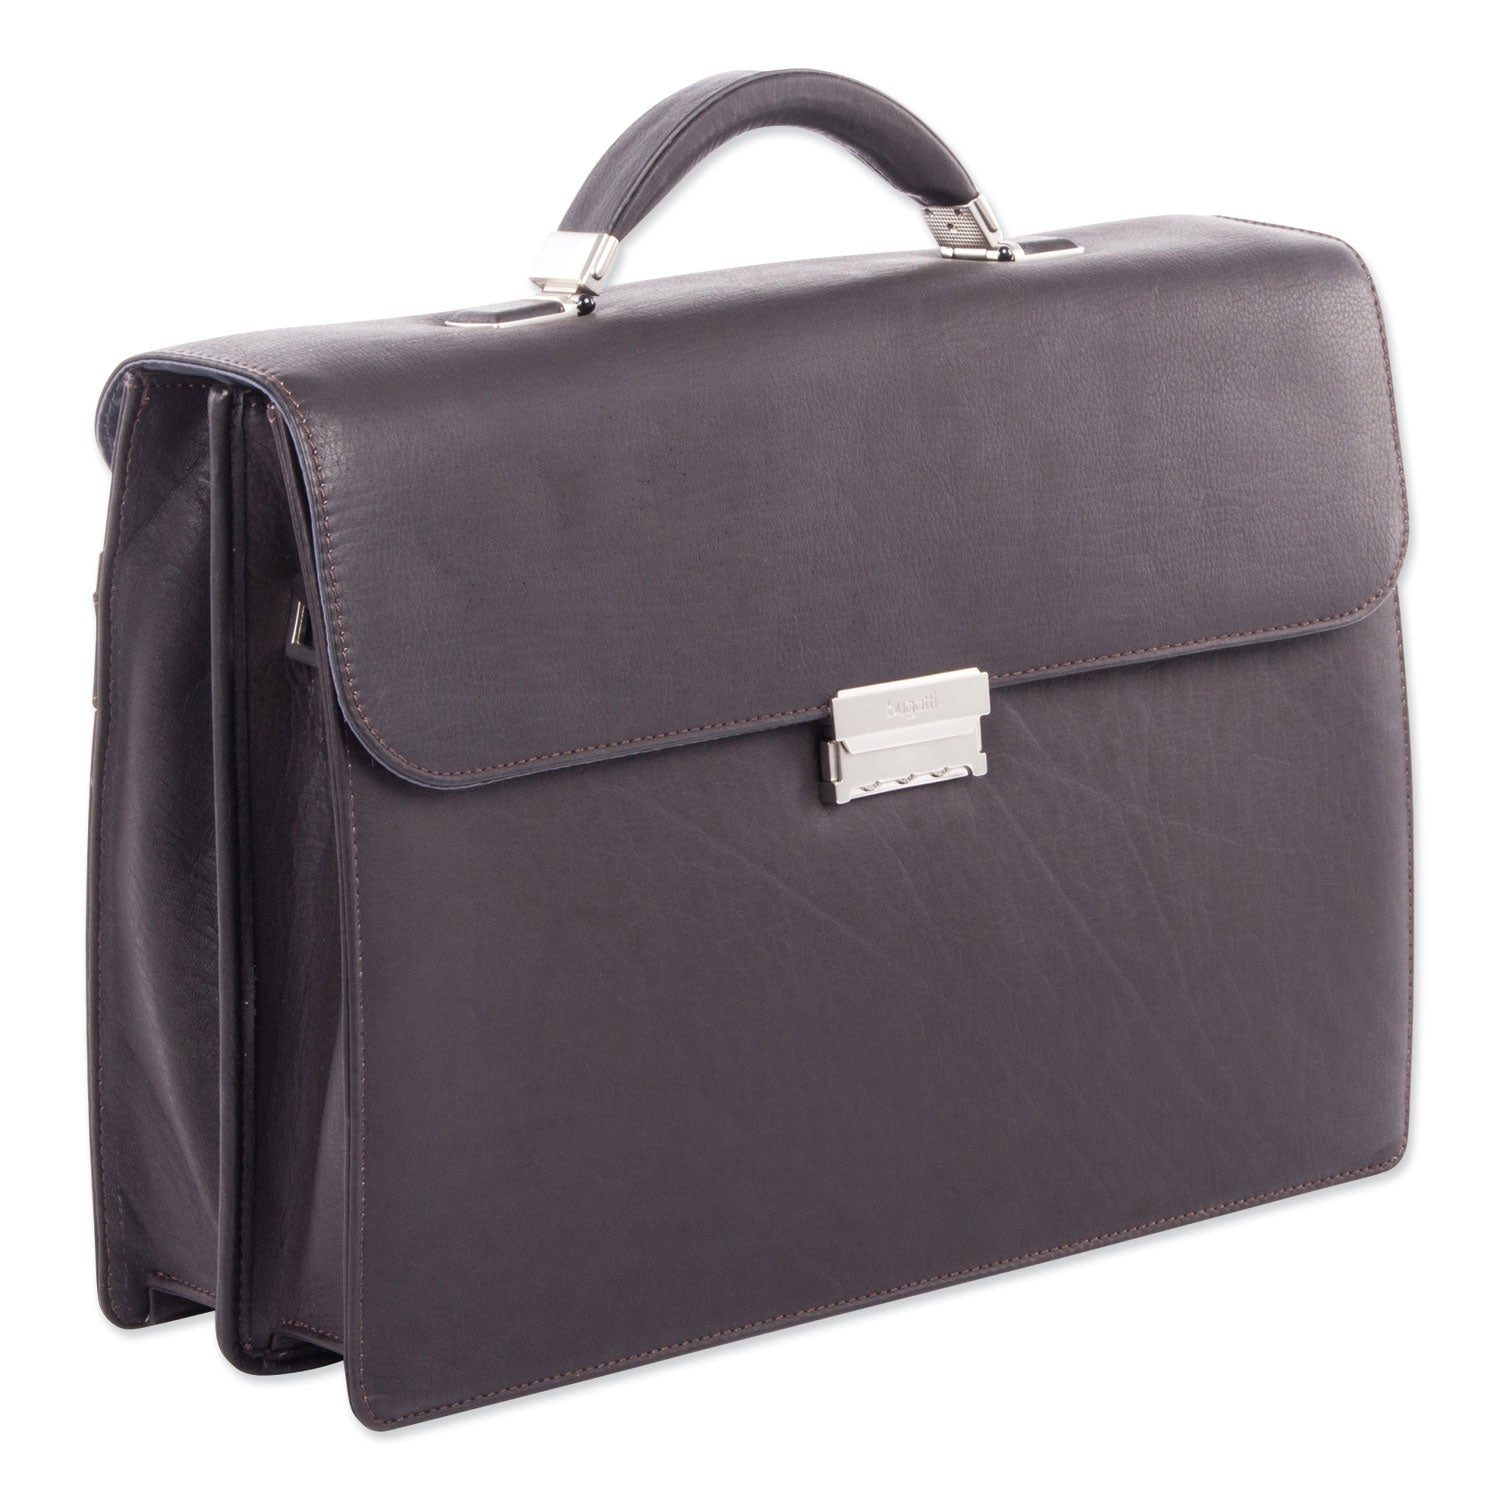 milestone-briefcase-fits-devices-up-to-156-leather-5-x-5-x-12-brown_swz49545802sm - 1